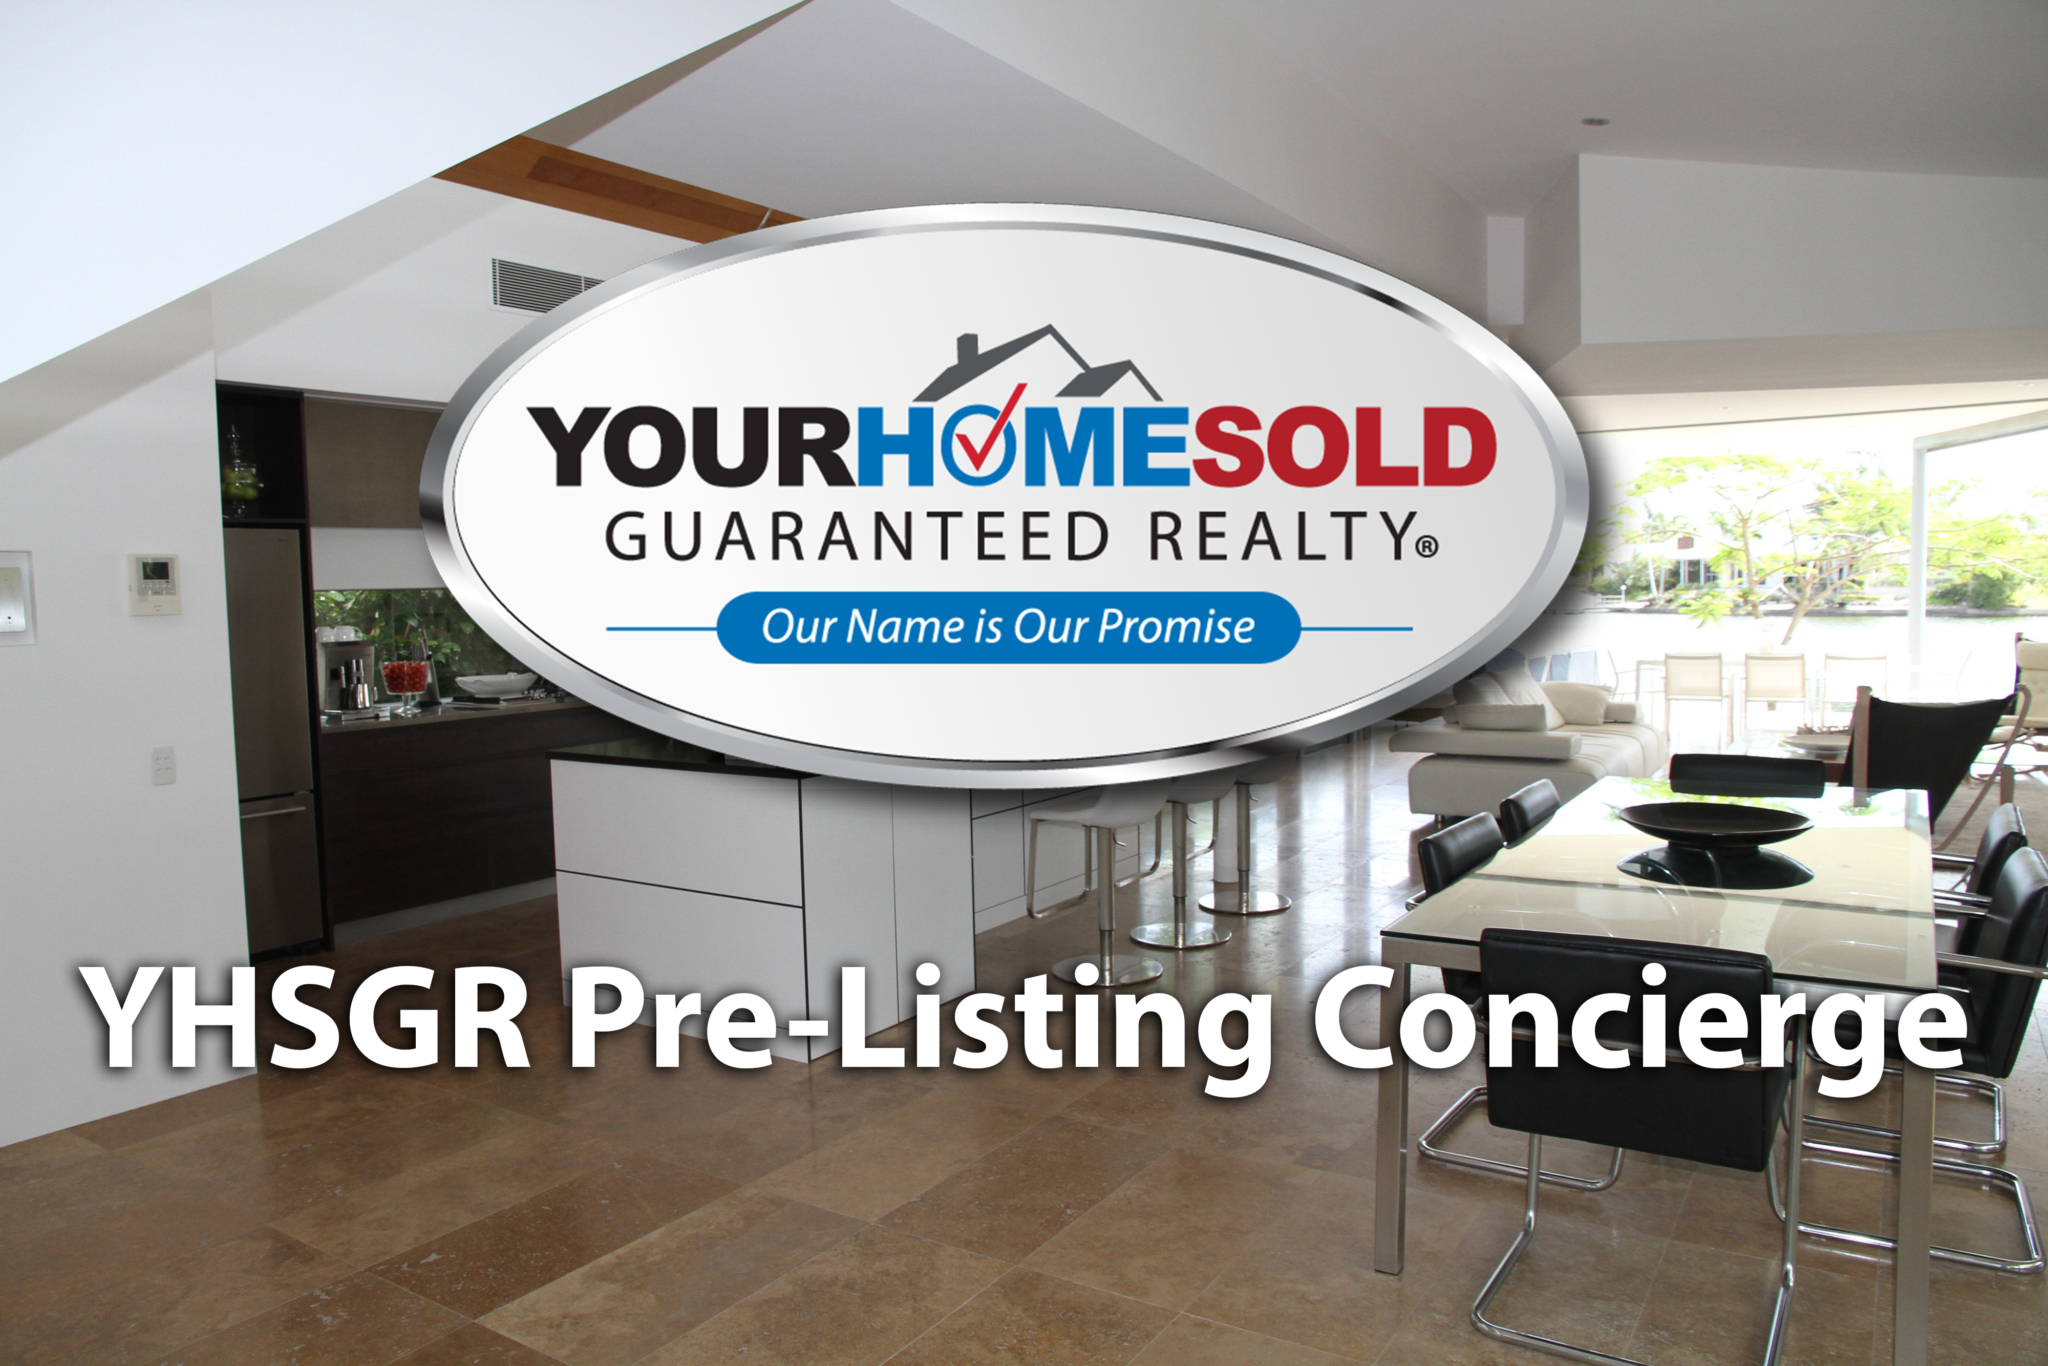 Your-Home-Sold-Guaranteed-Realty-PRE-LISTING-CONCIERGE-launches-in-December-2022-2048x1366.jpg